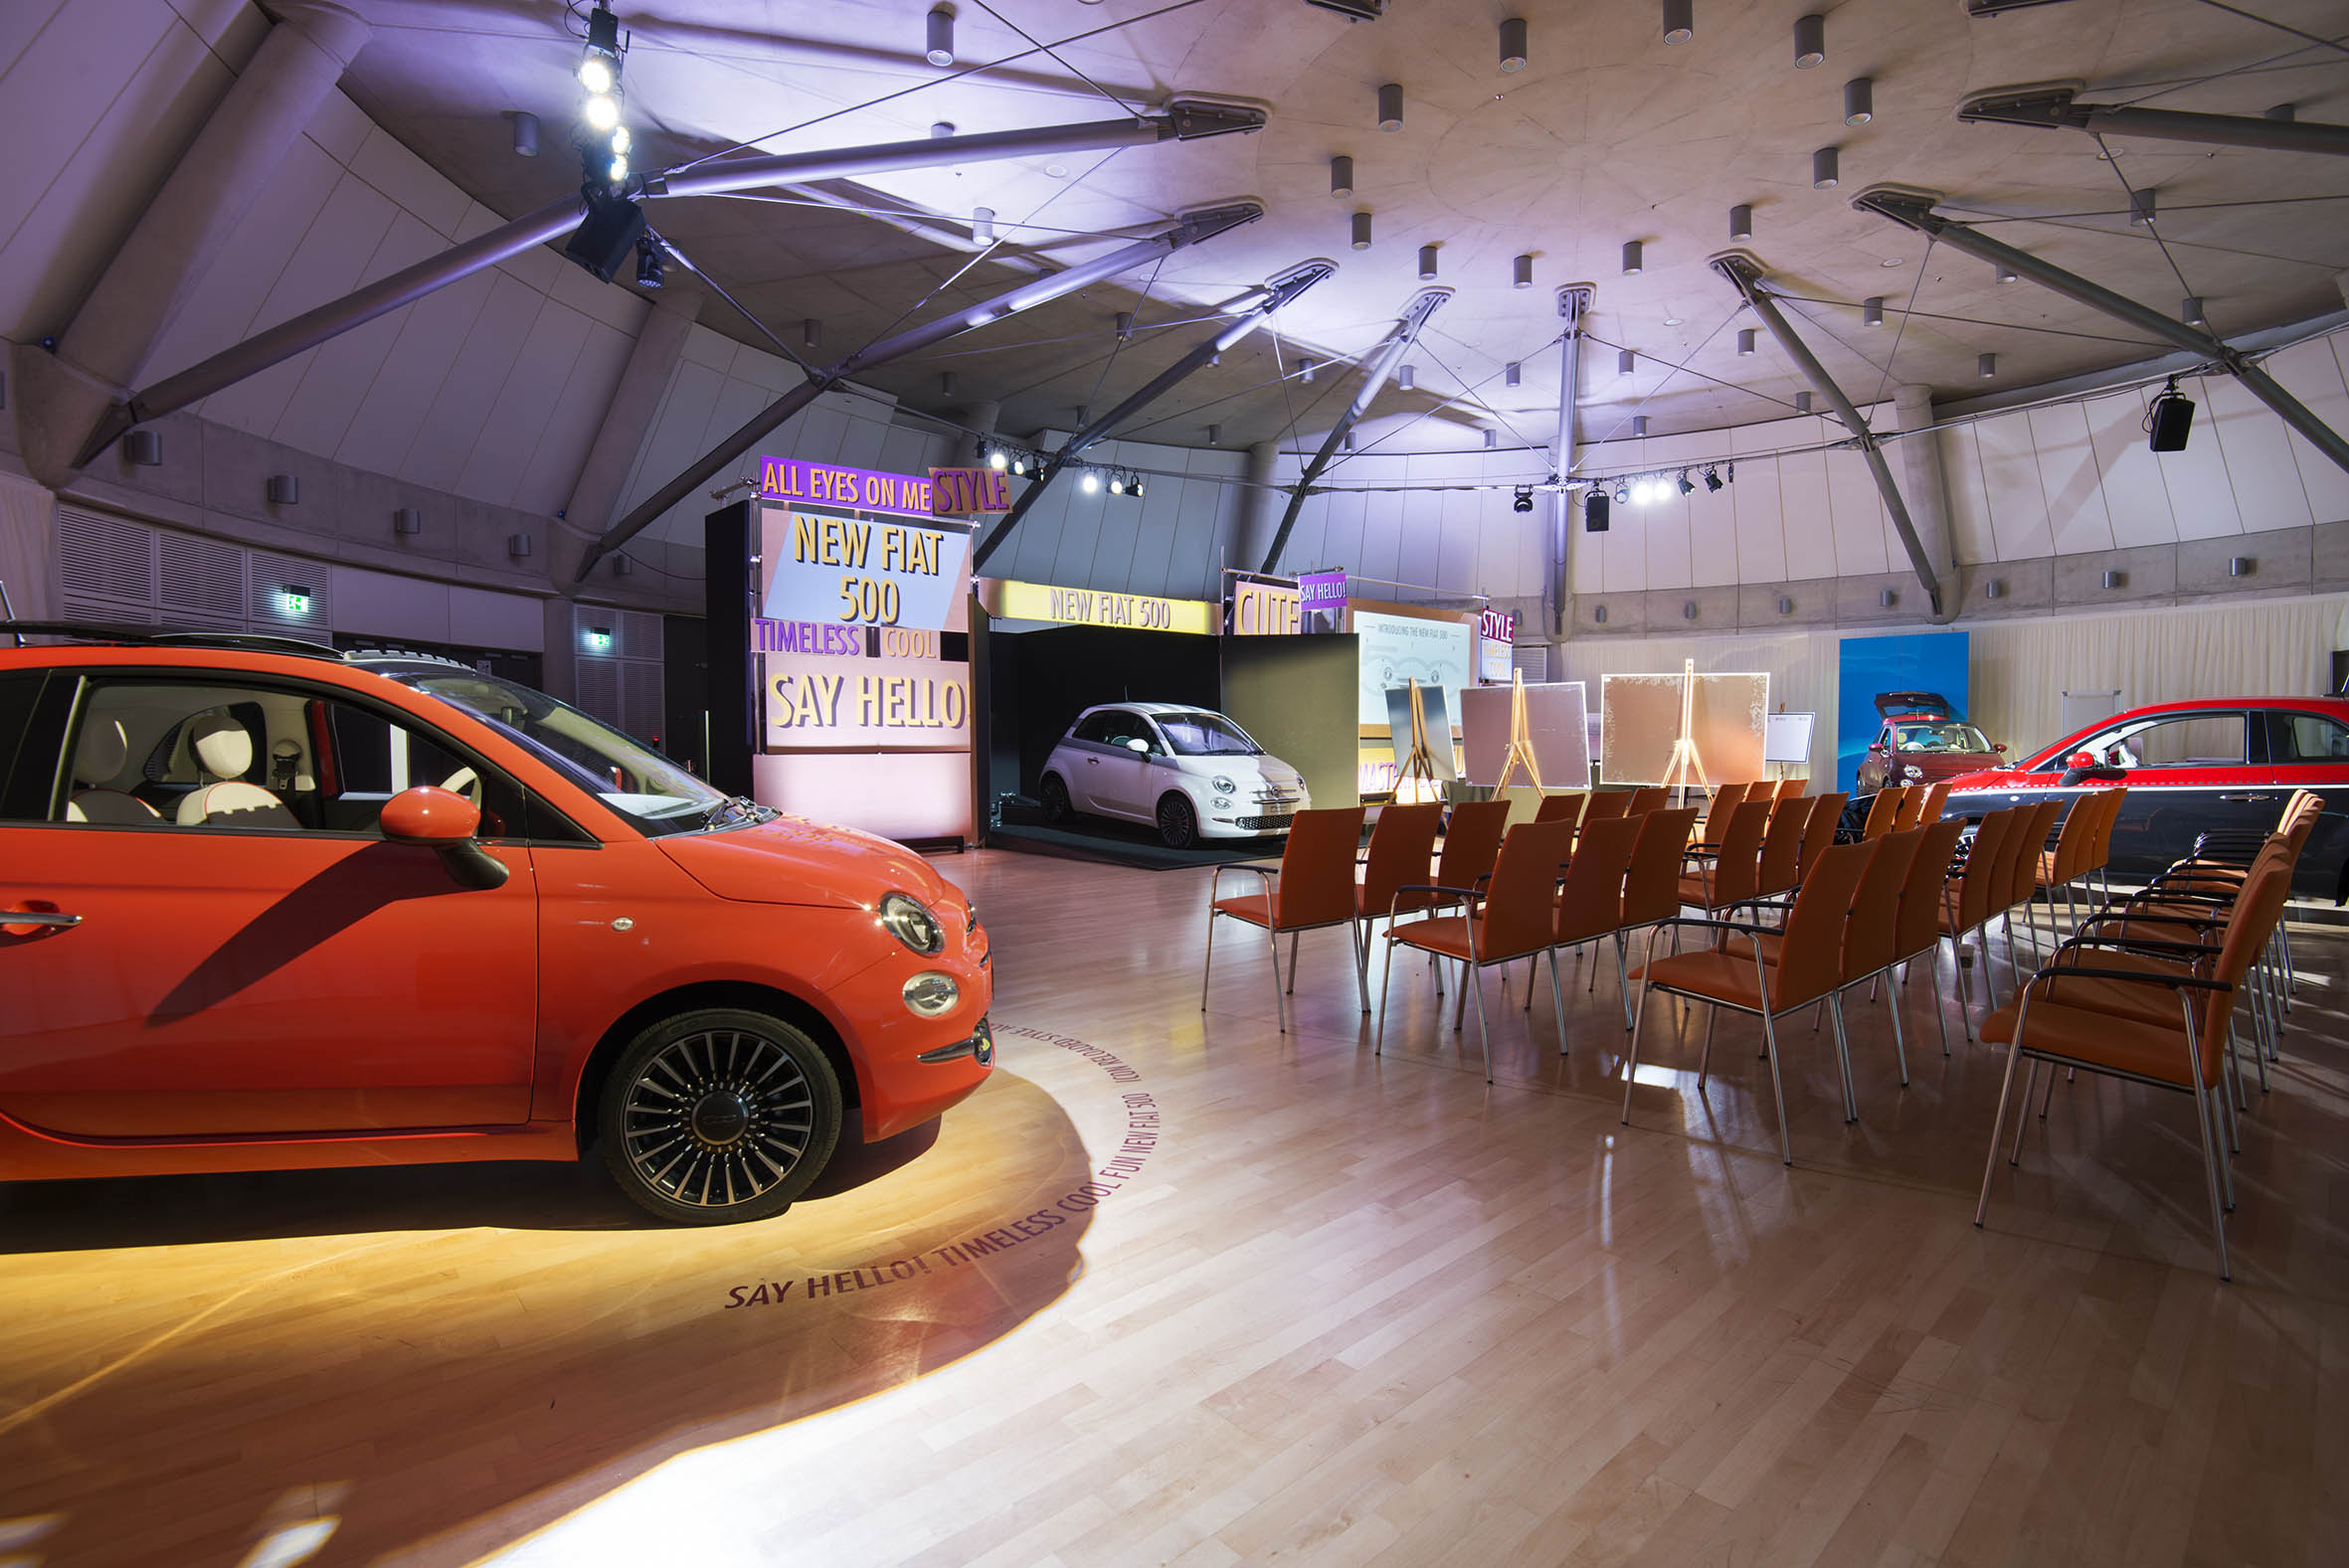 An image of New Fiat 500 Training Event